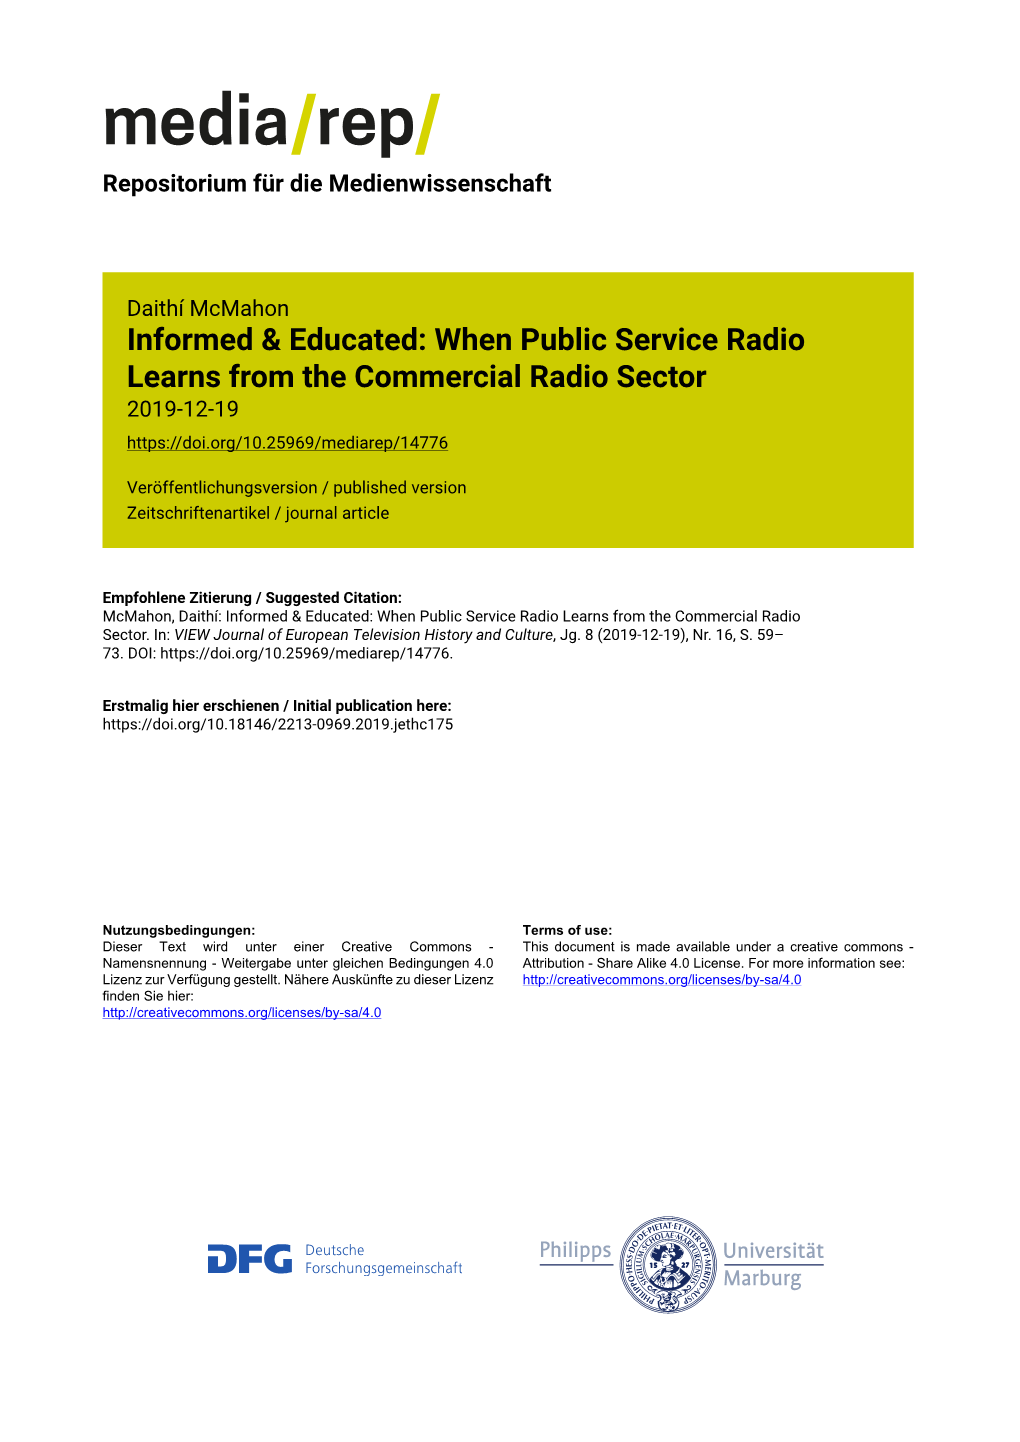 Informed & Educated: When Public Service Radio Learns from The